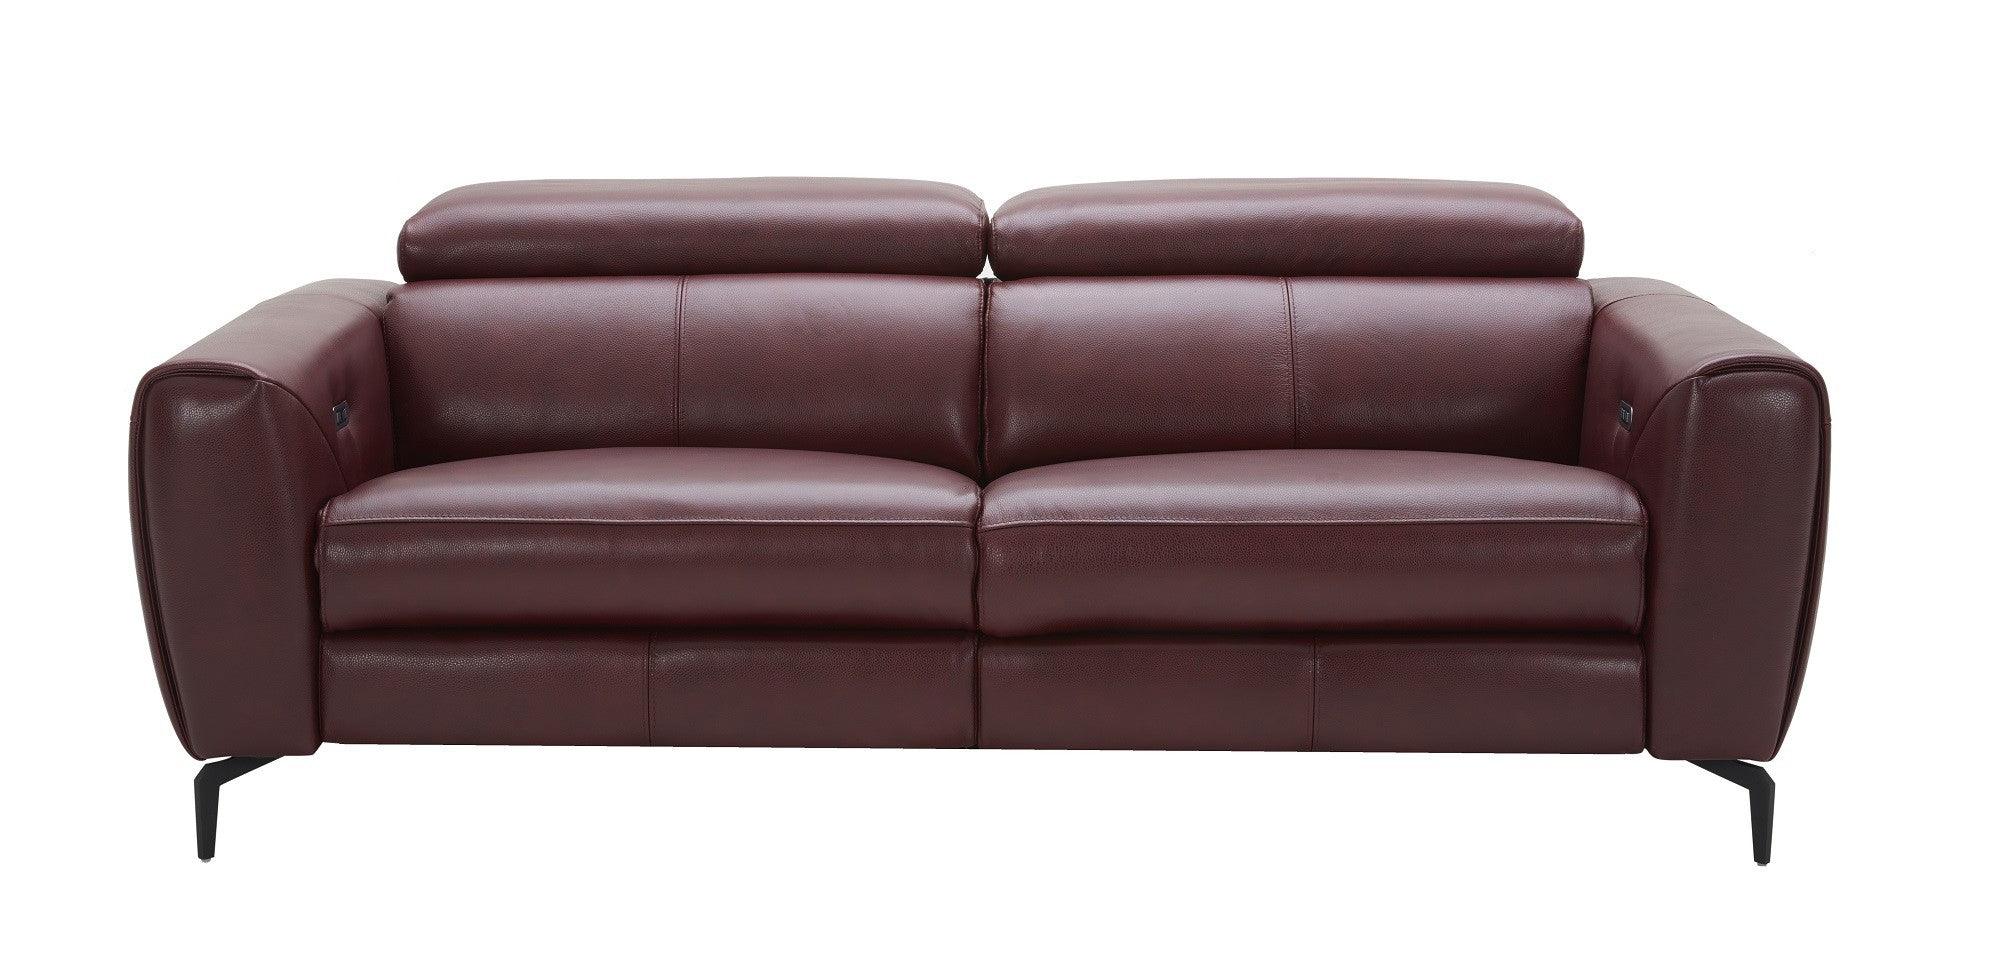 London Motion Sofa Collection - Euro Living Furniture